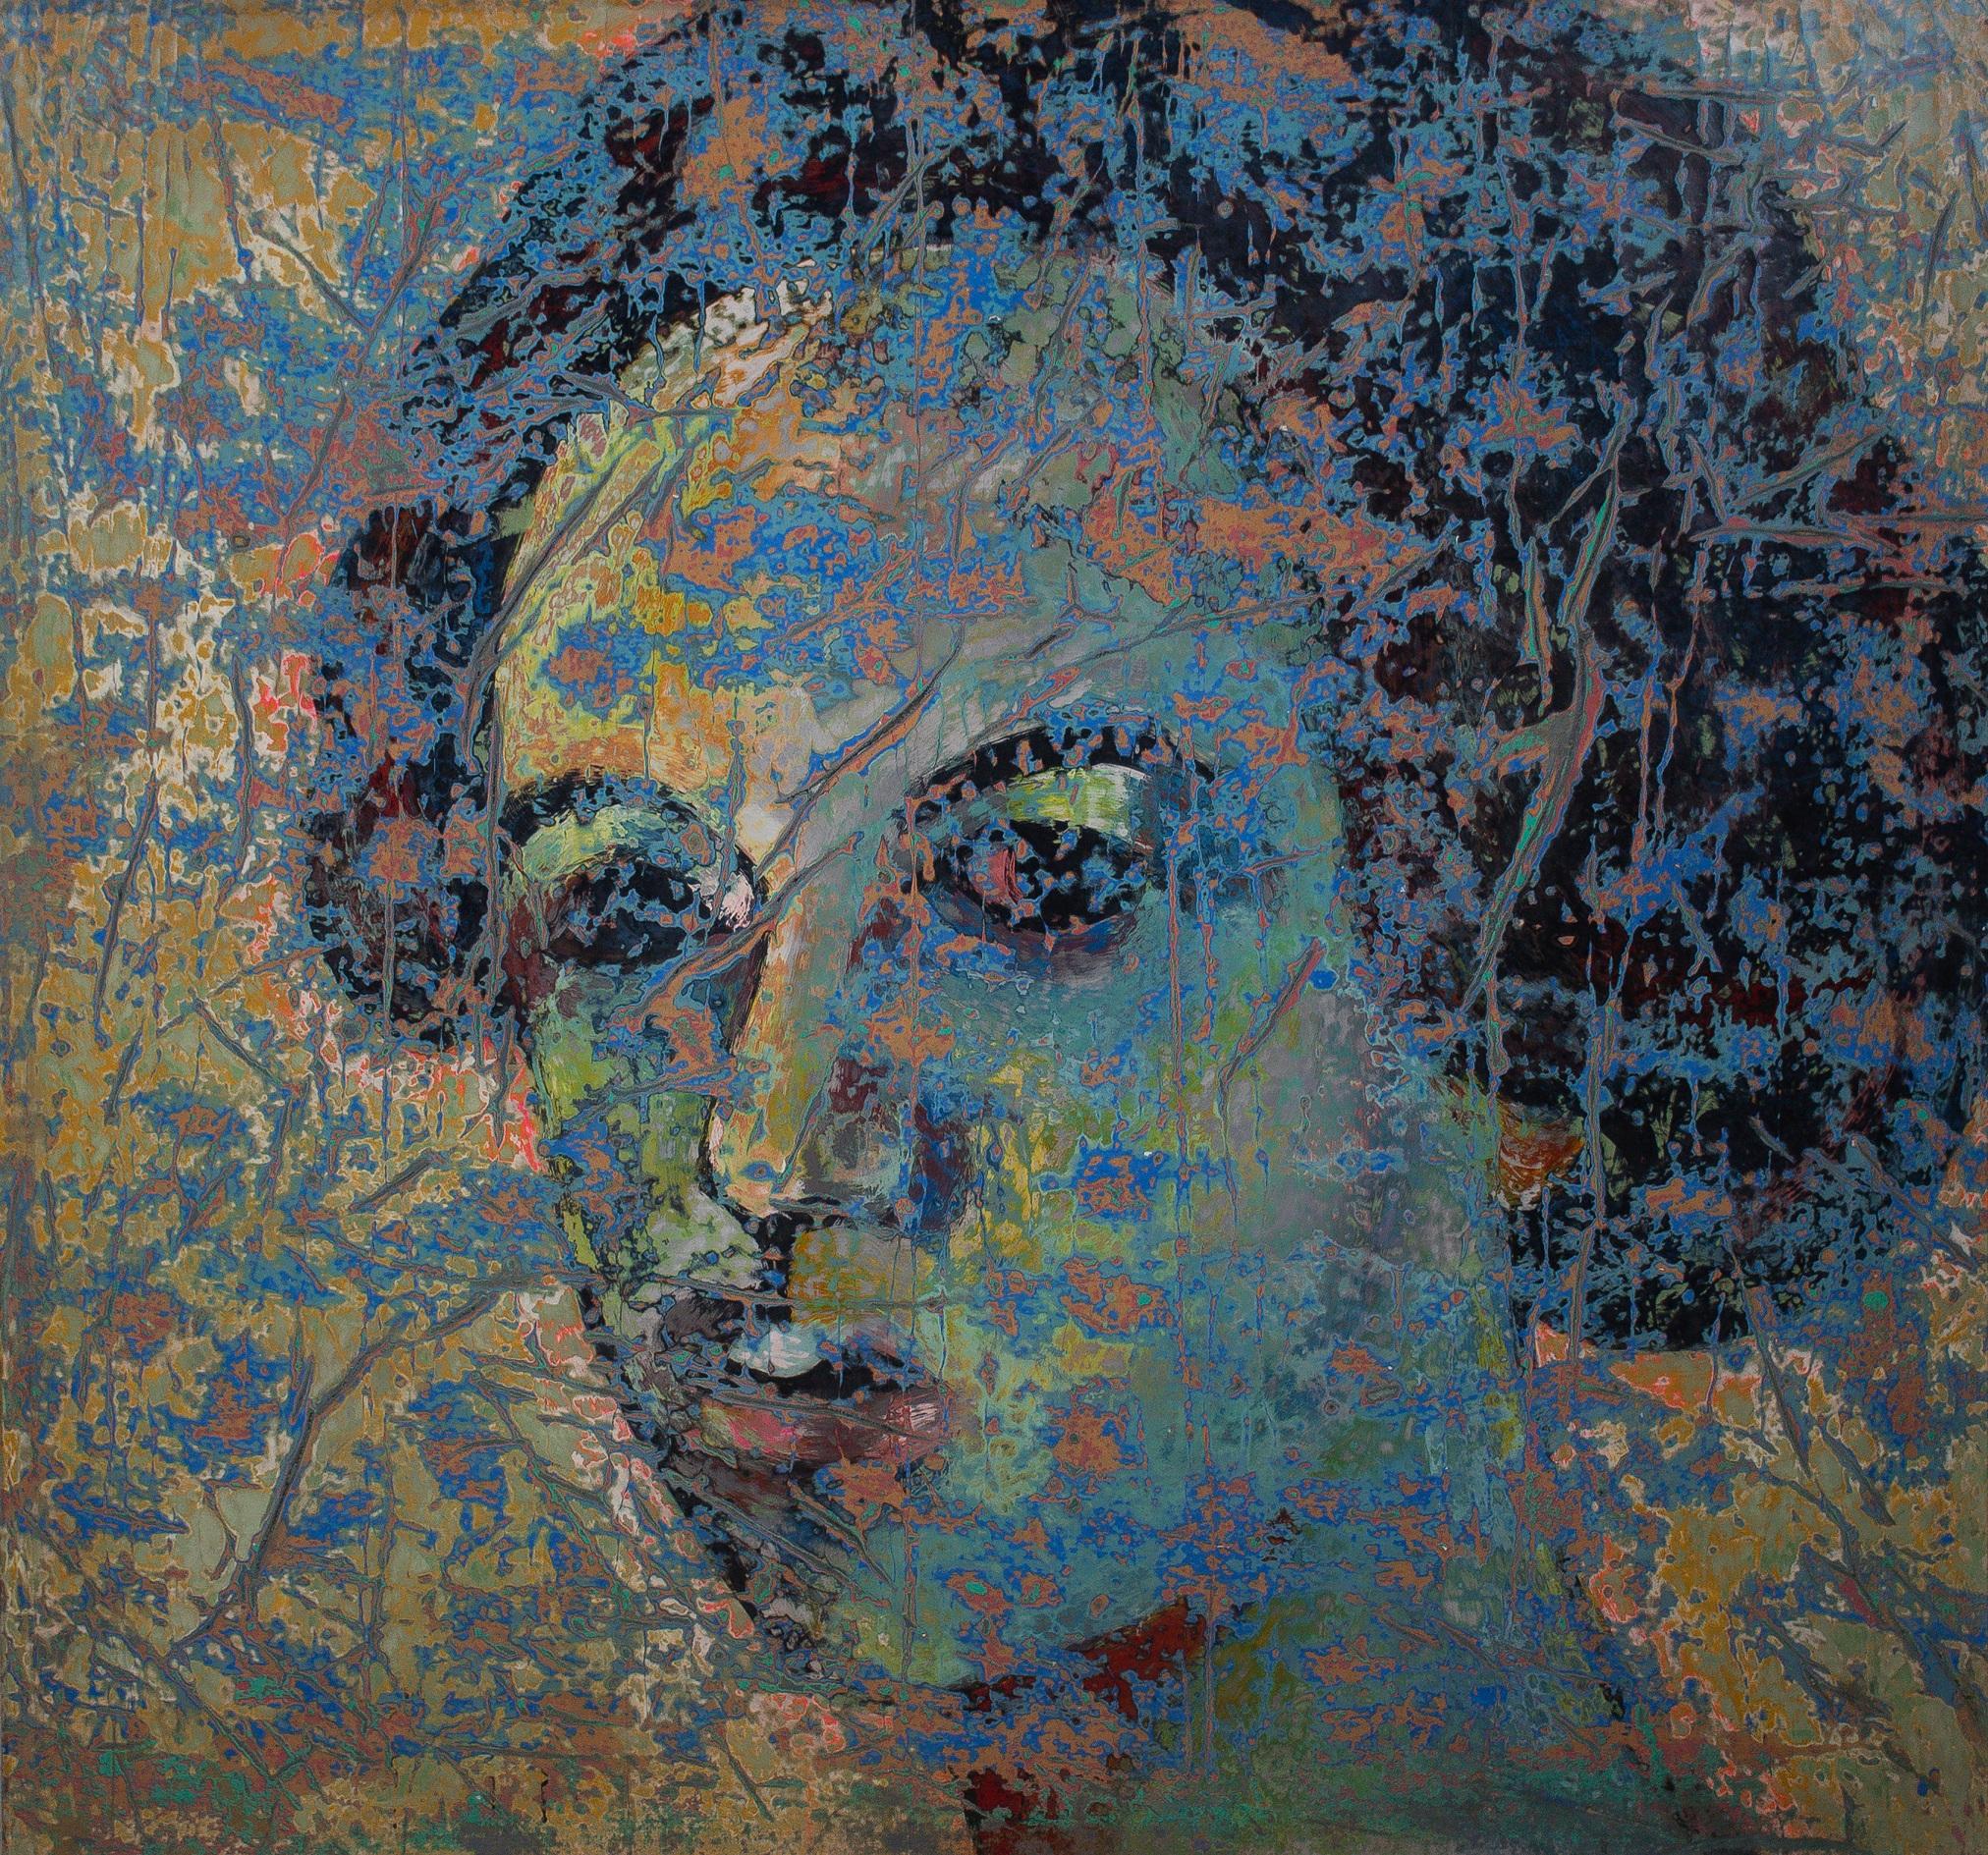 "Portrait of Young Woman" Abstract Painting 55" x 58" inch by Ibrahim Khatab

Ibrahim Khatab was born in Cairo 1984, works as a co-teacher in Cairo University, he mixes between painting, video art and installation in his artworks. He started since